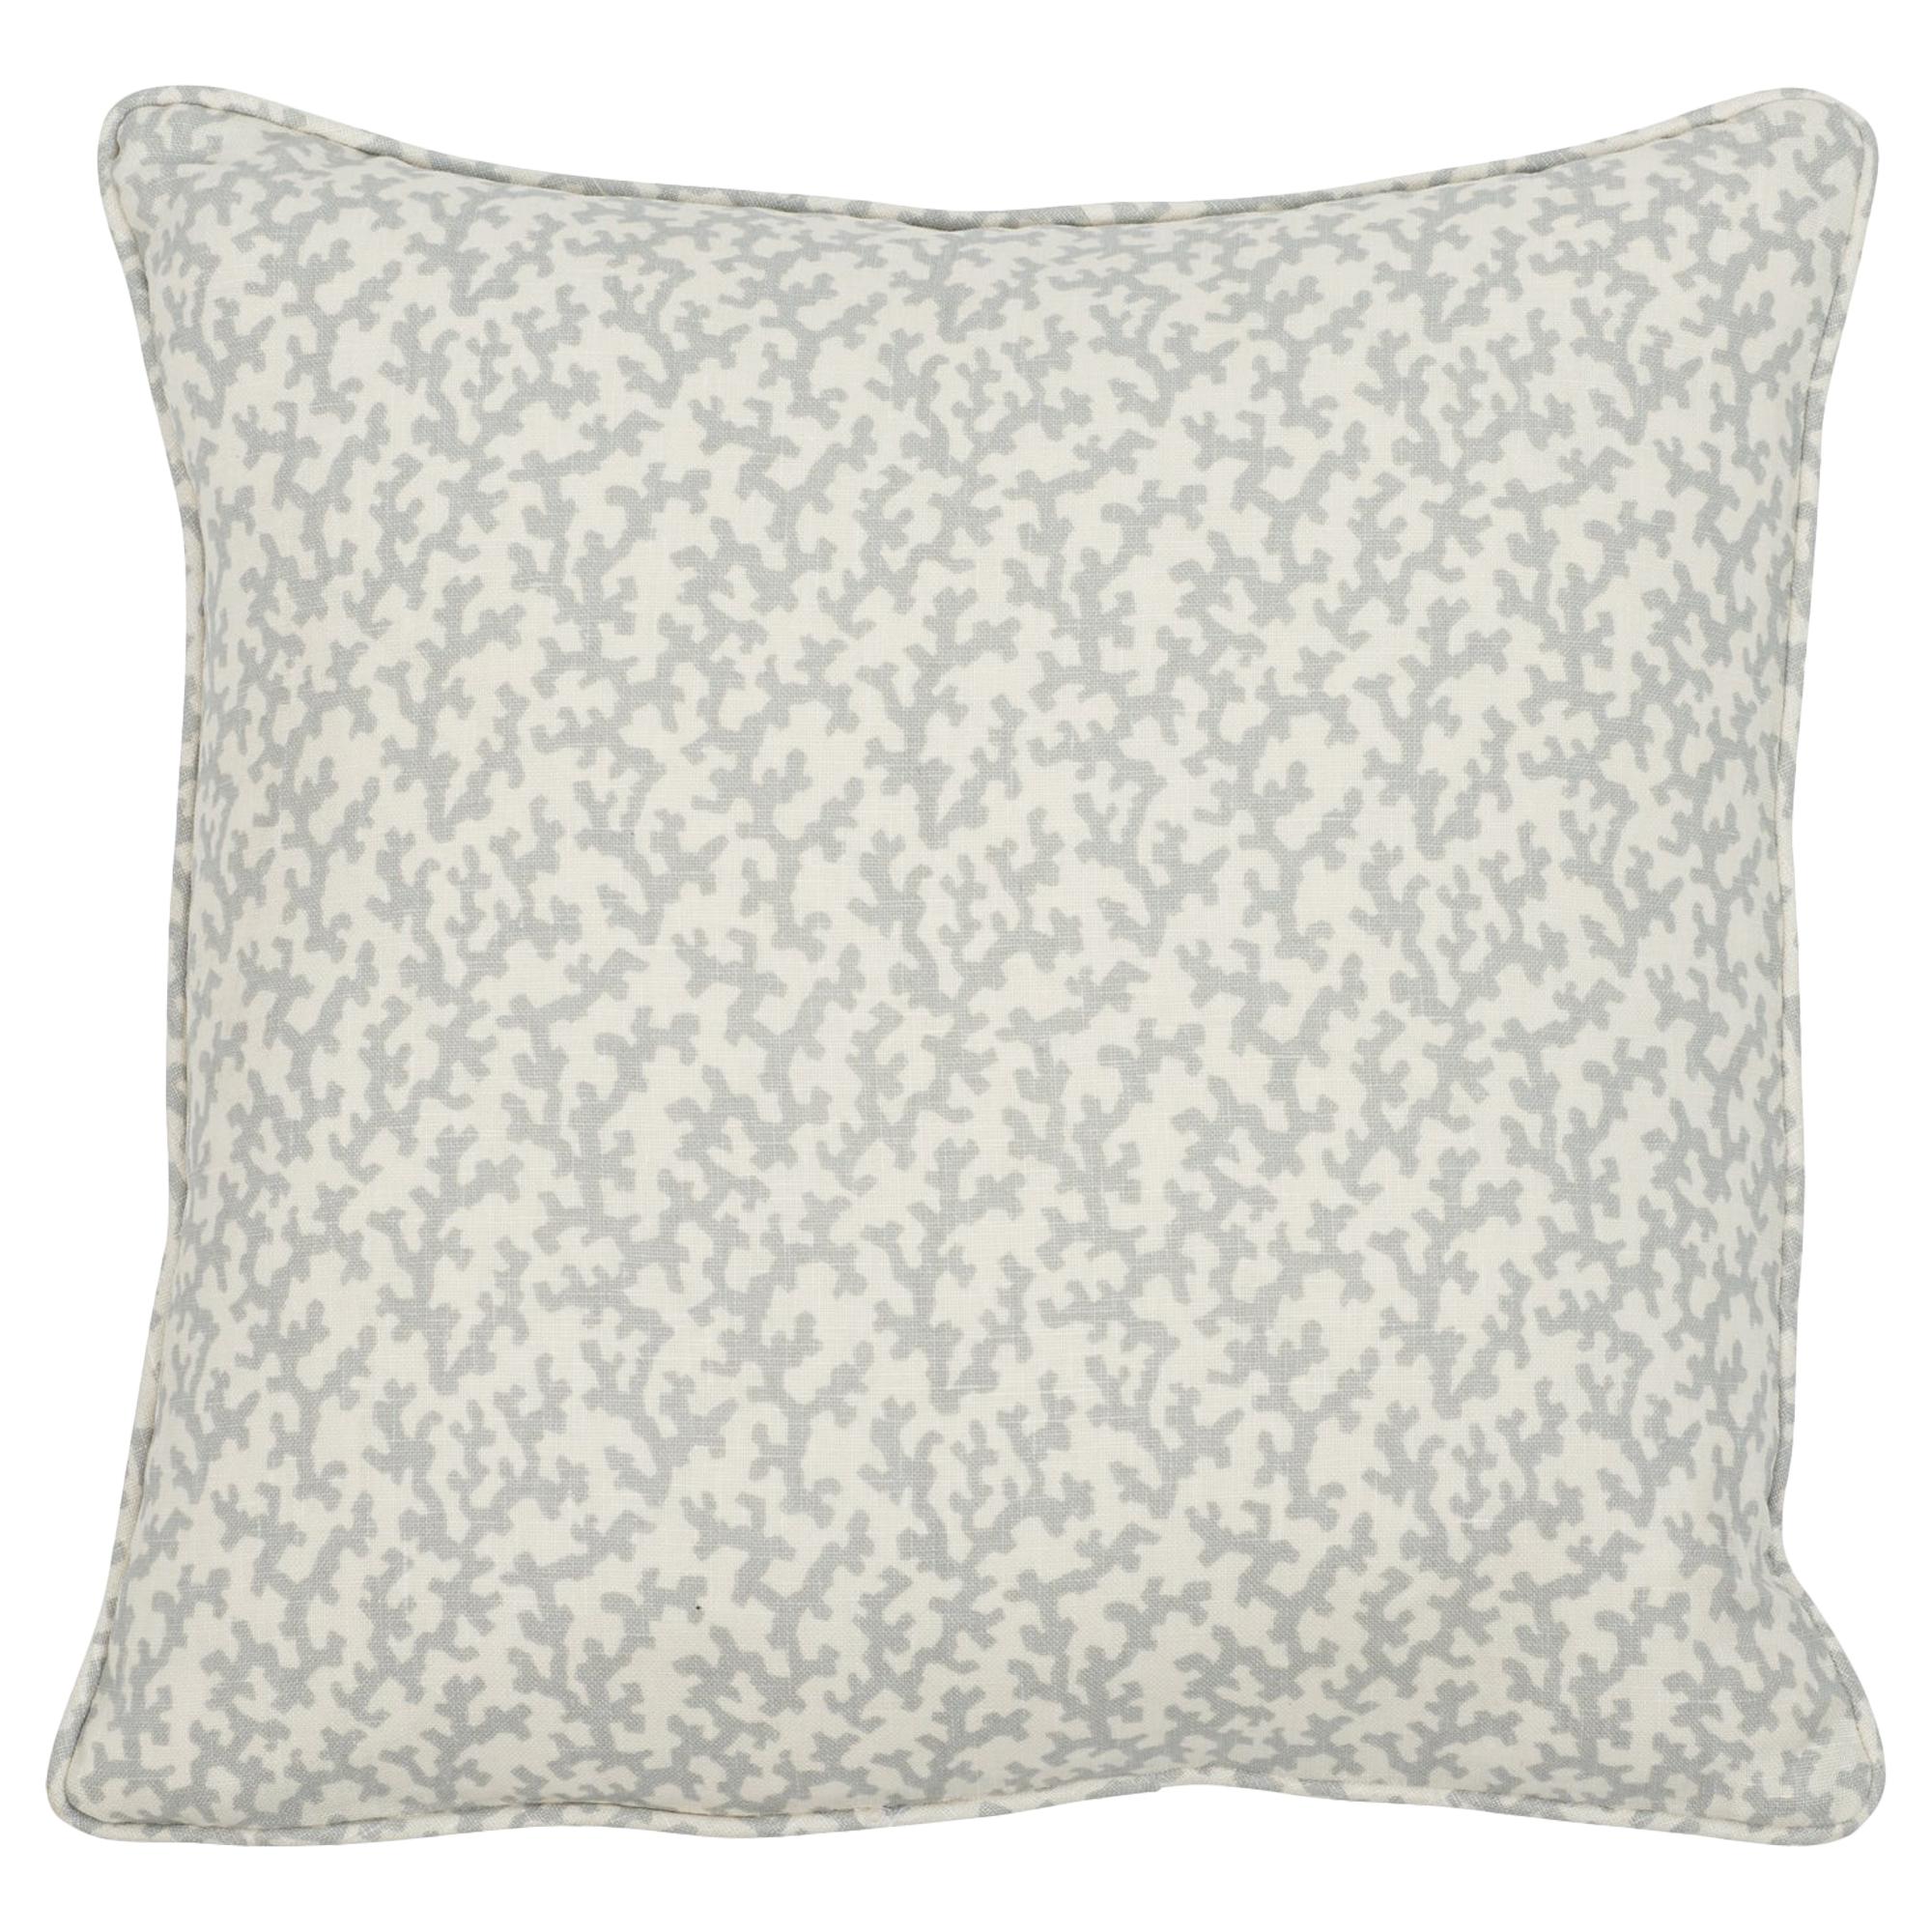 Schumacher x Veere Grenney Folly Opington Blue Two-Sided Linen Pillow For Sale